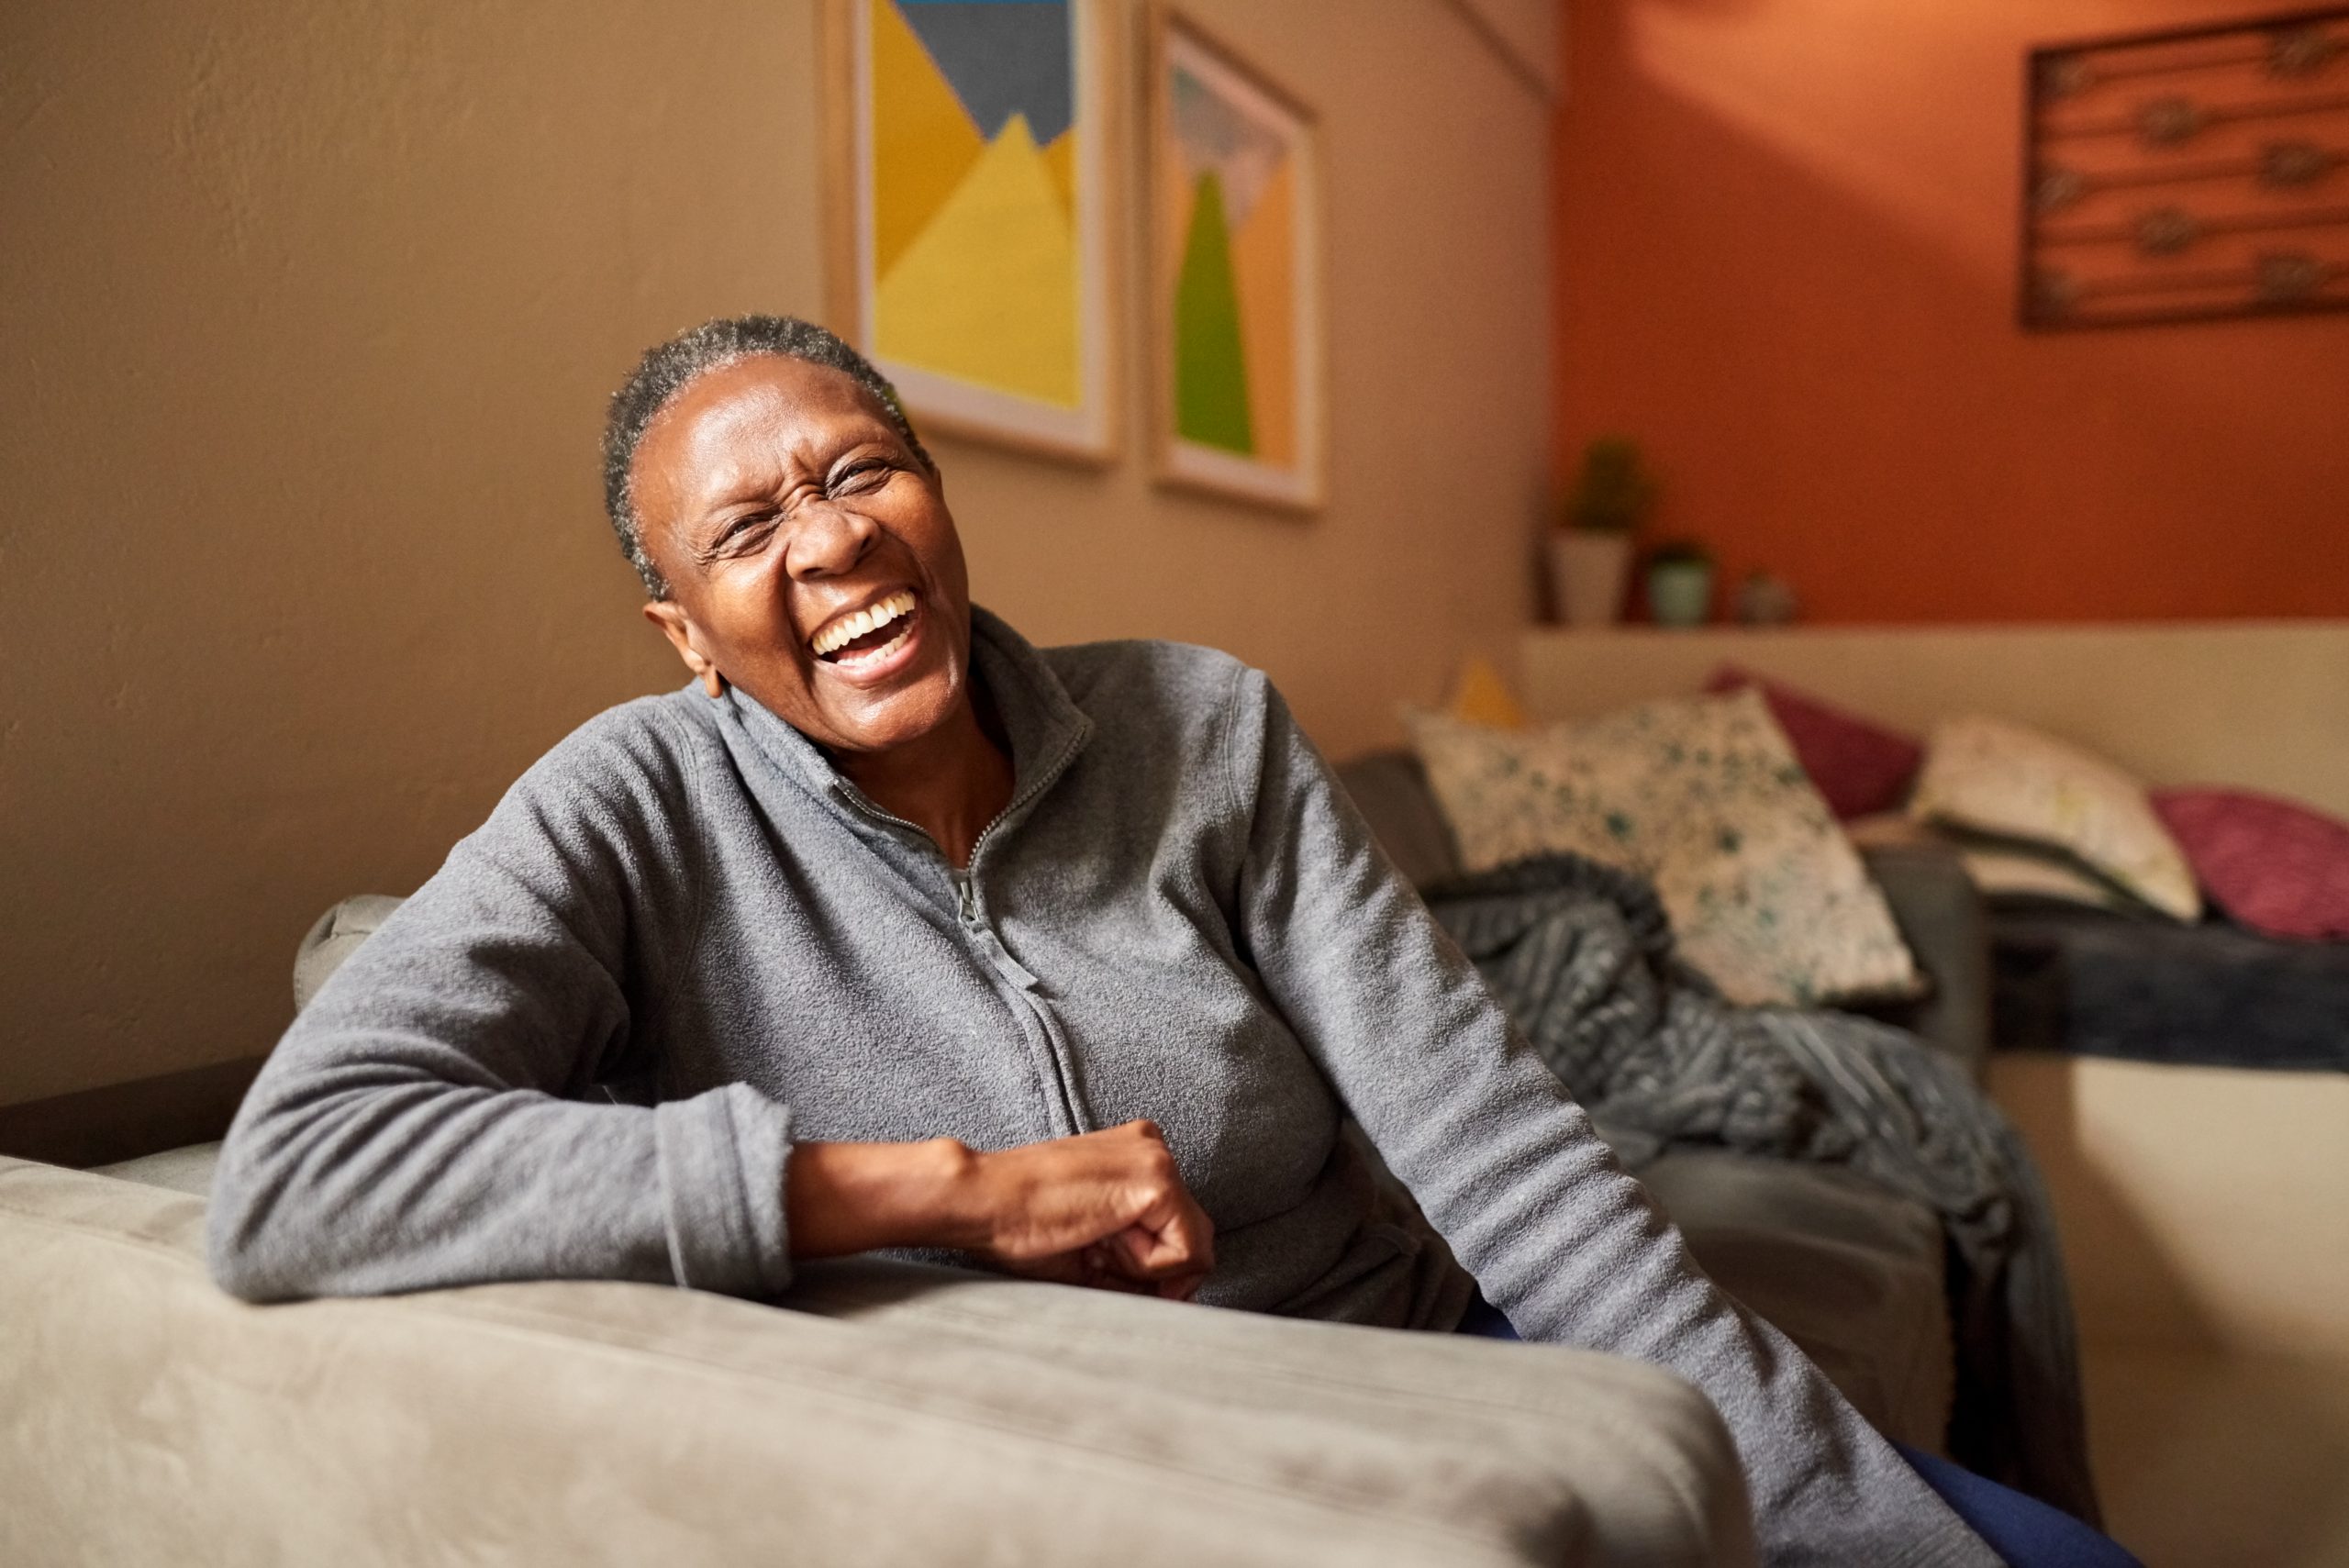 older woman at home laughing